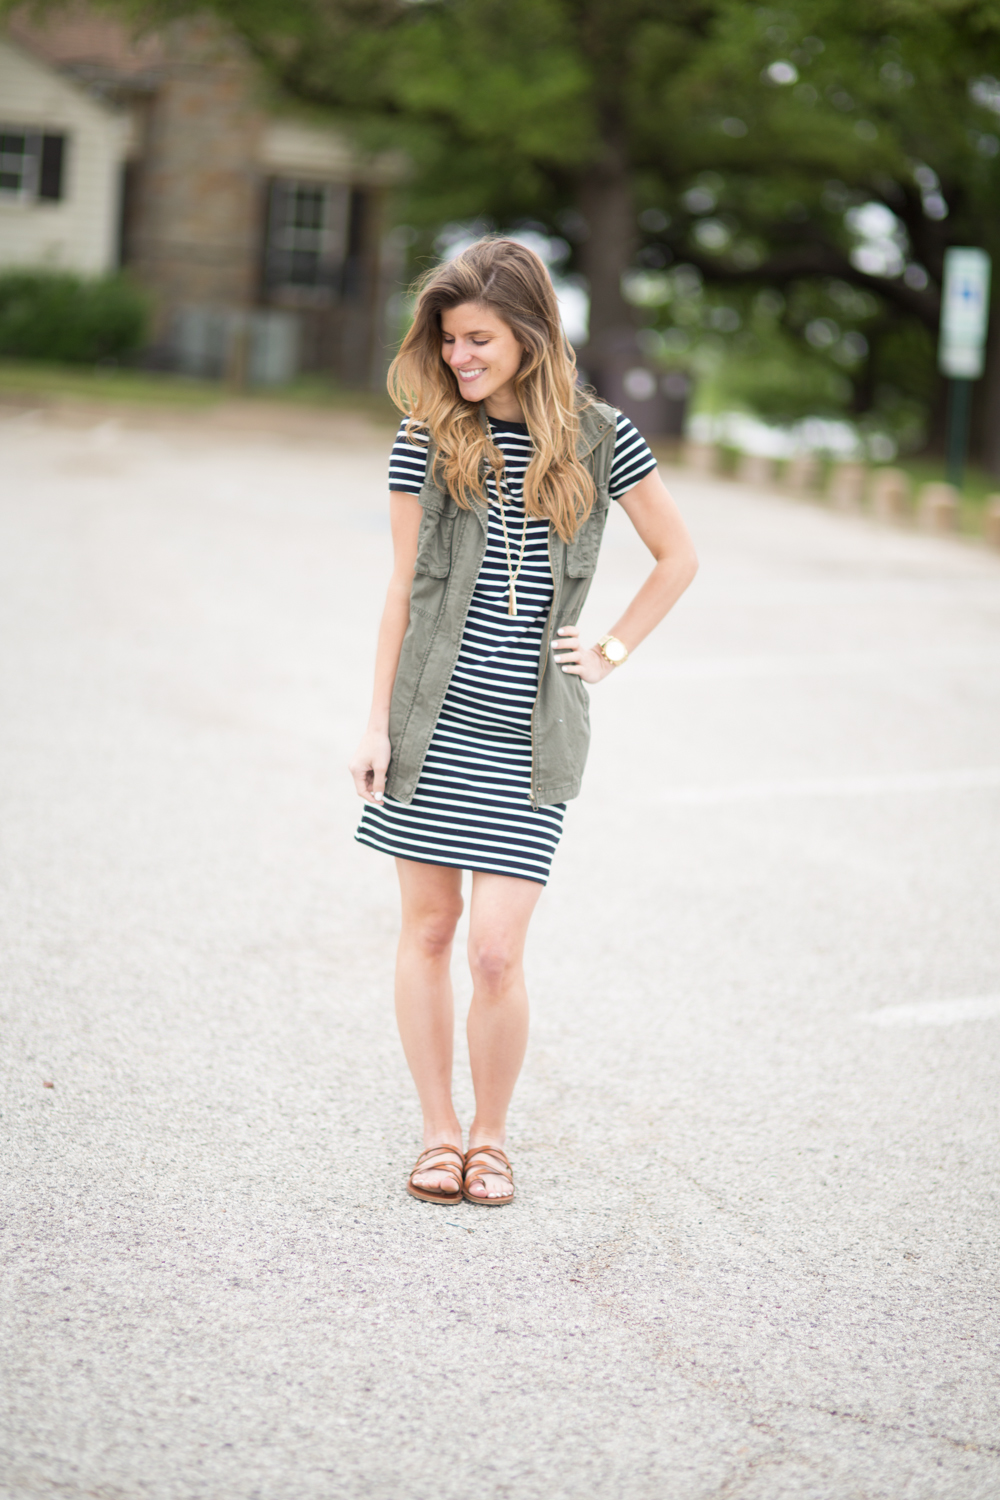 Striped Dress Outfit Ideas - 3 Ways To Style a Striped Dress